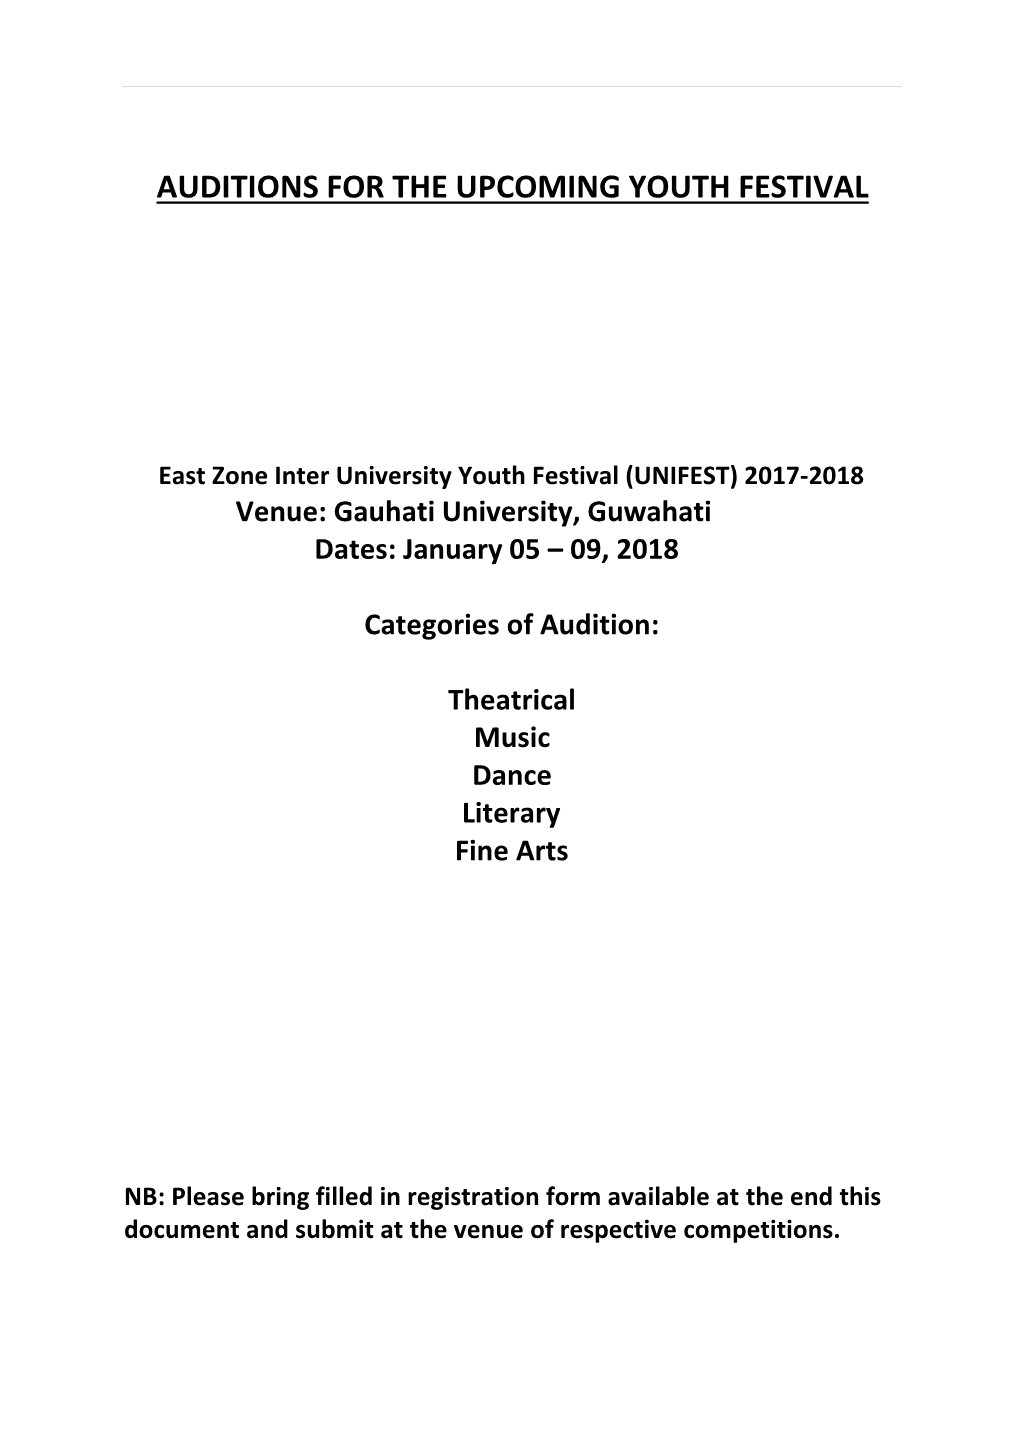 Auditions for the Upcoming Youth Festival